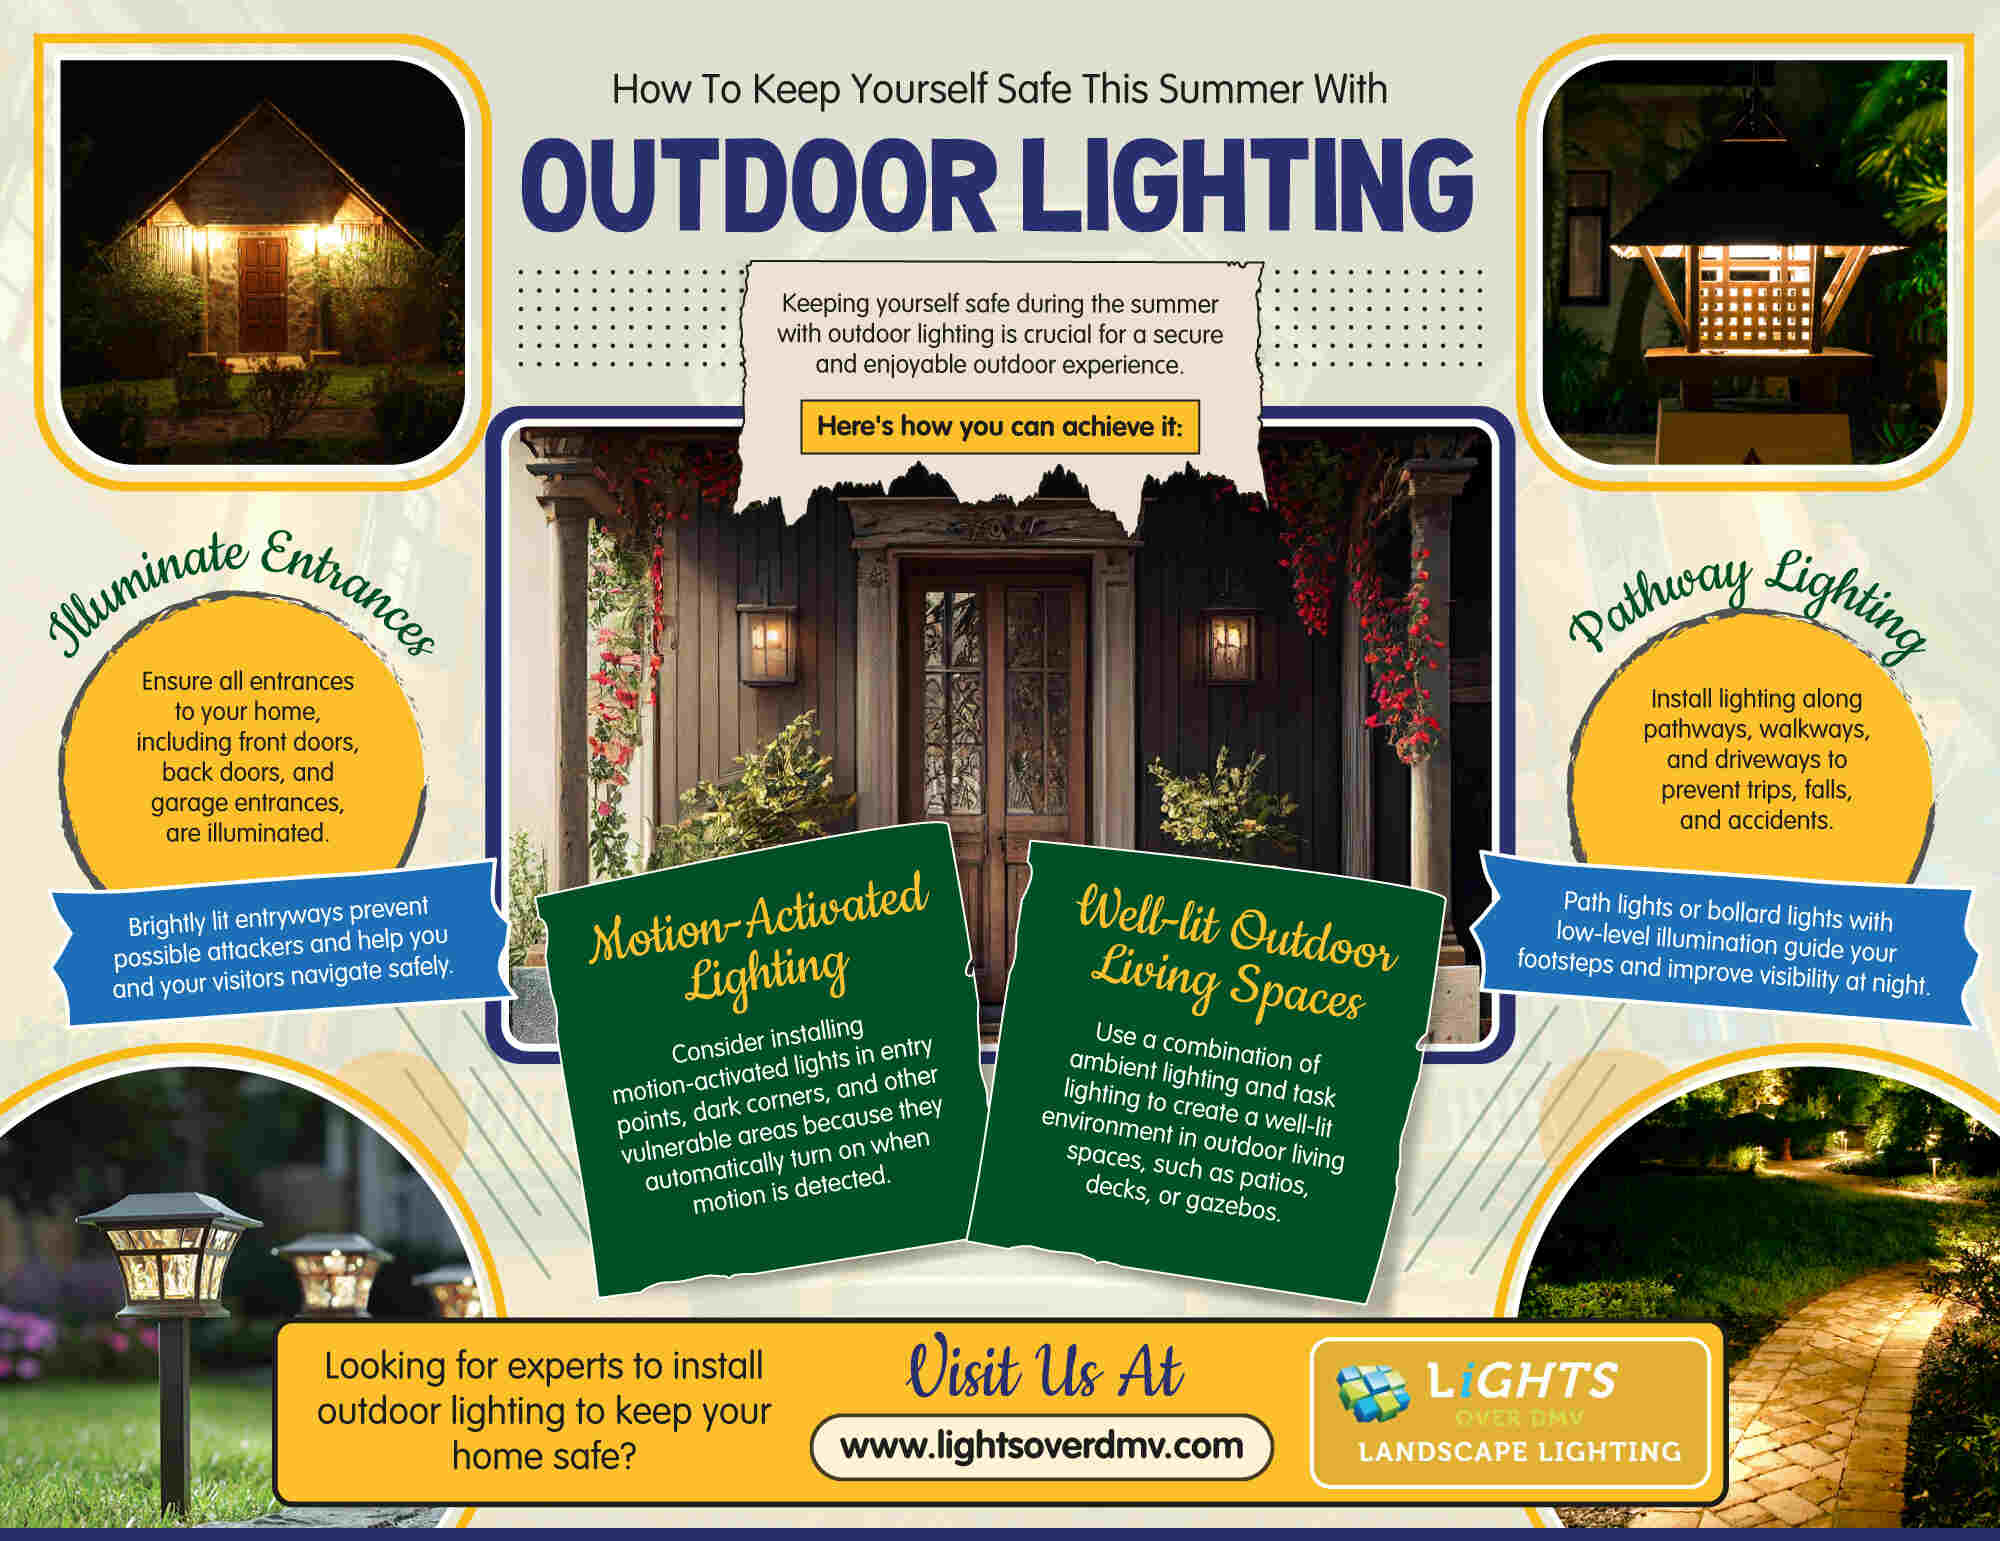 How To Keep Yourself Safe This Summer With Outdoor Lighting